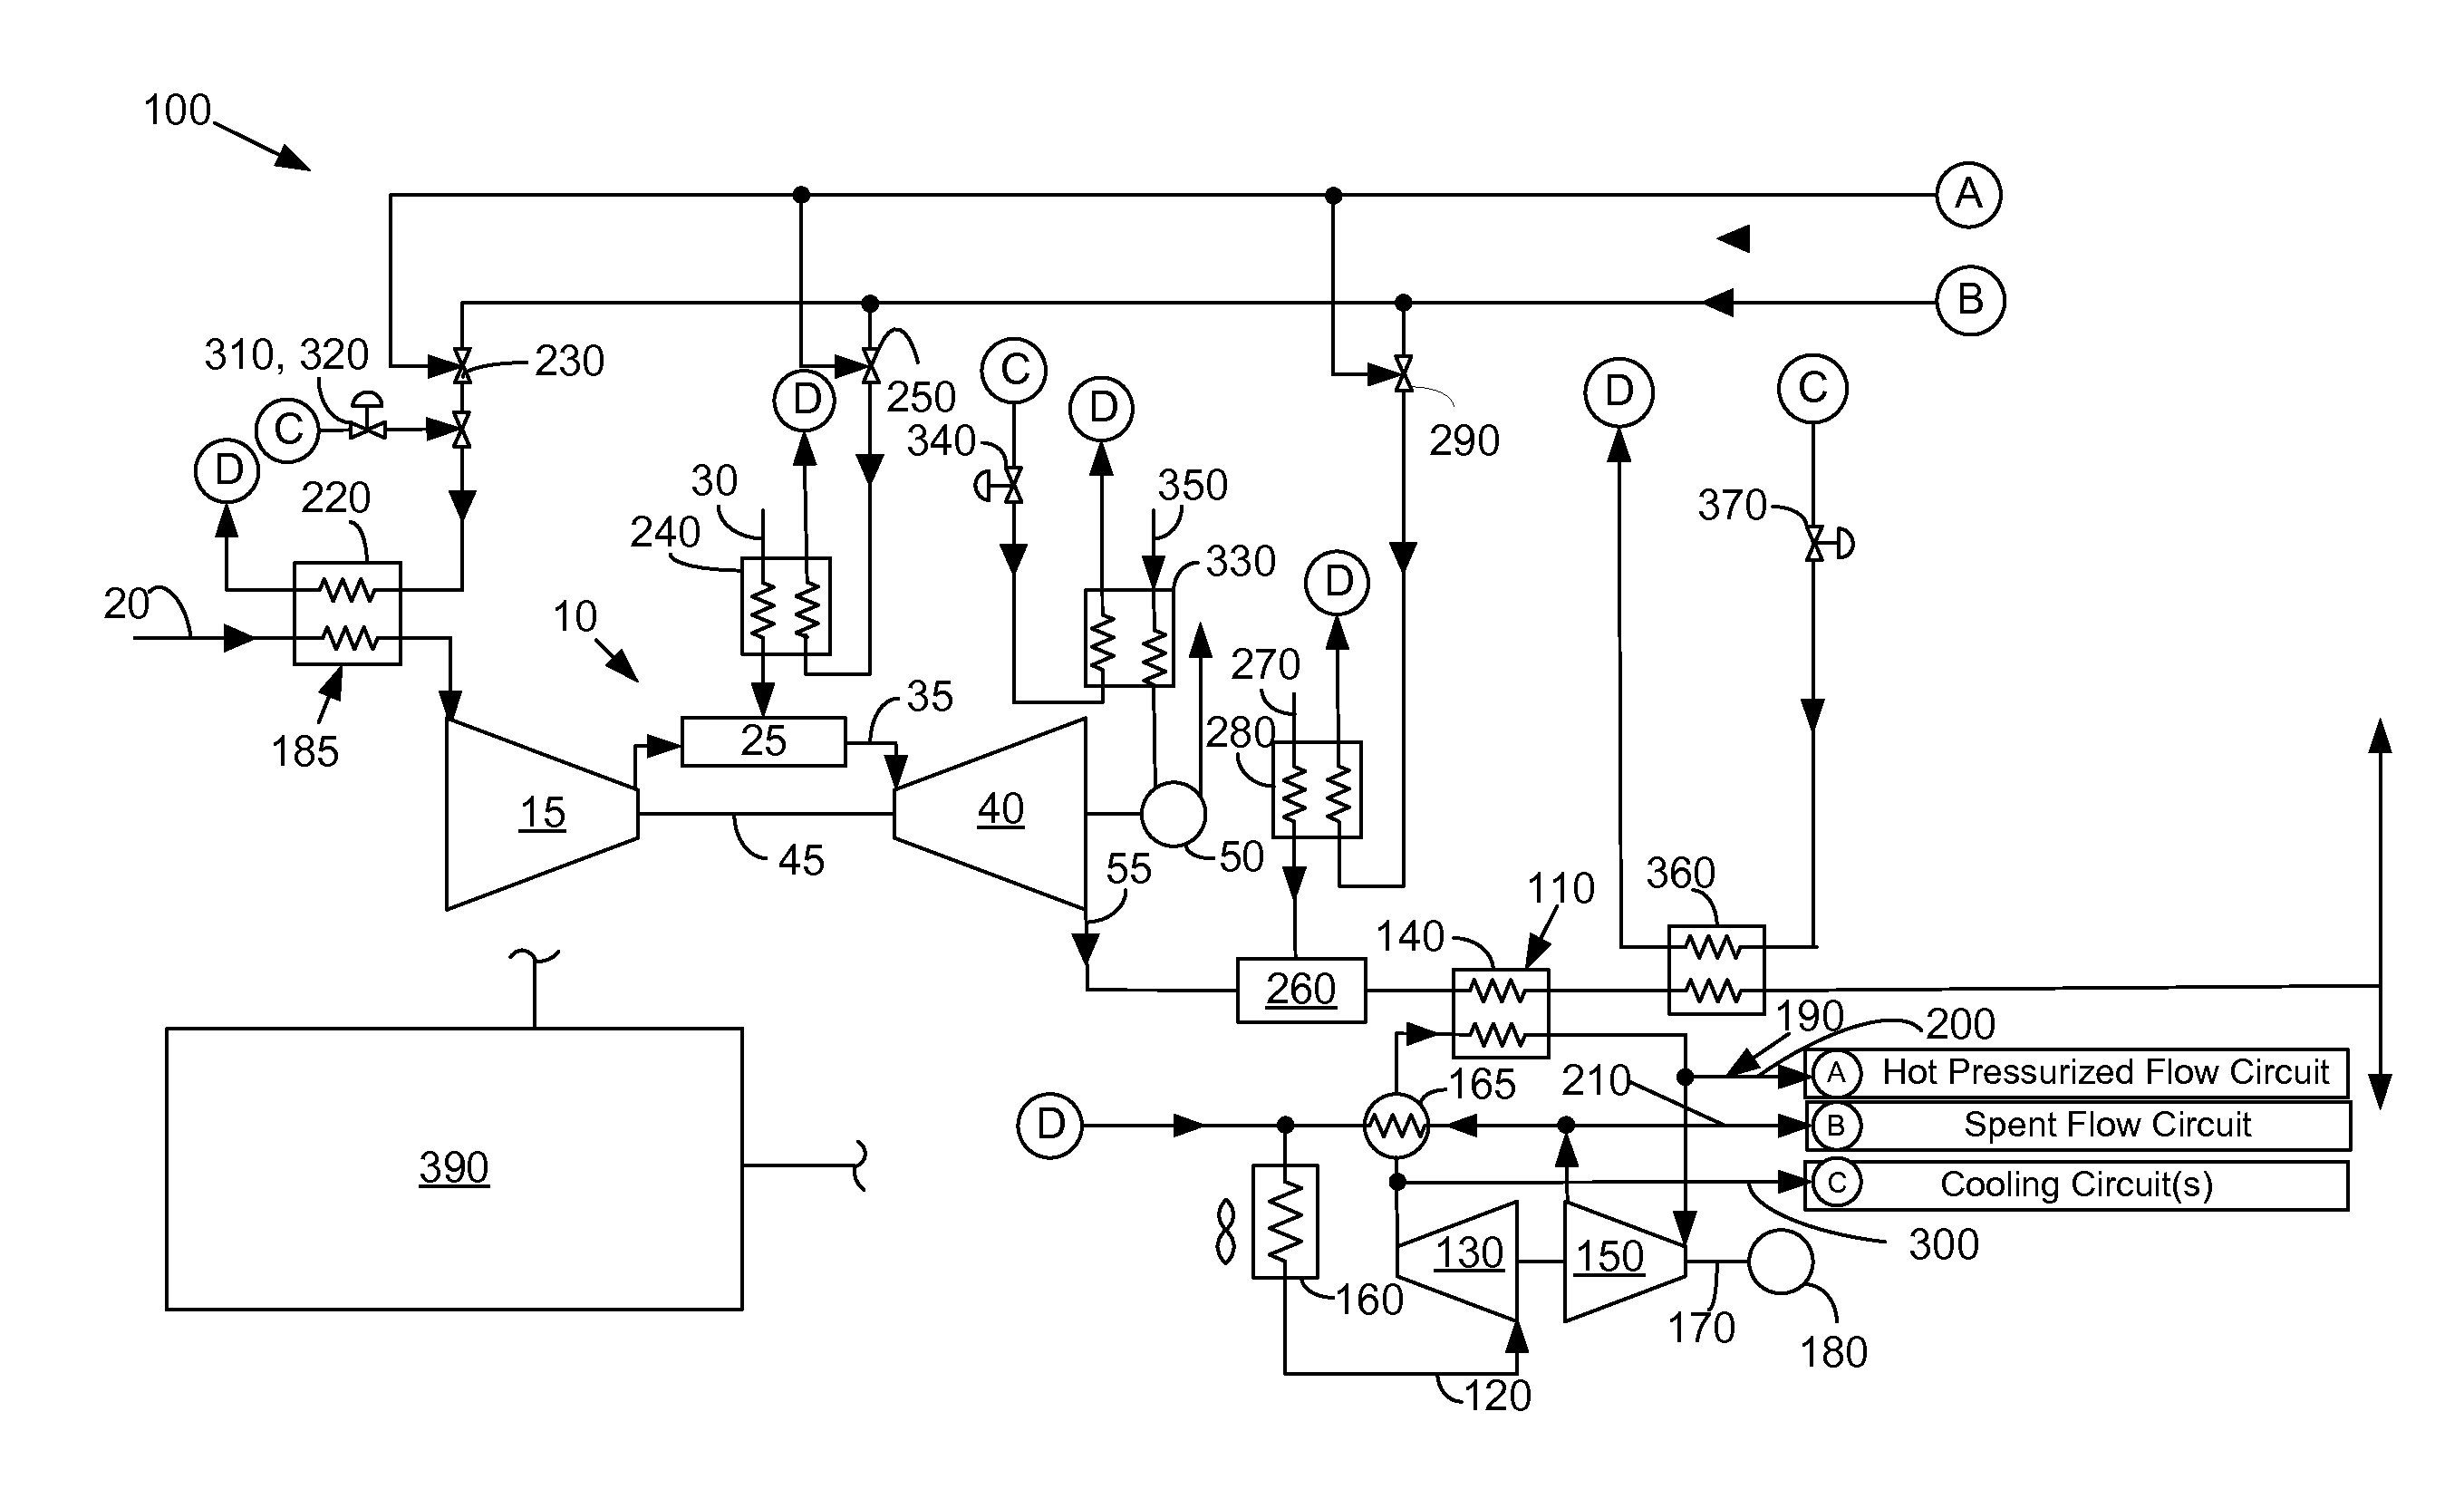 Gas turbine engine with integrated bottoming cycle system